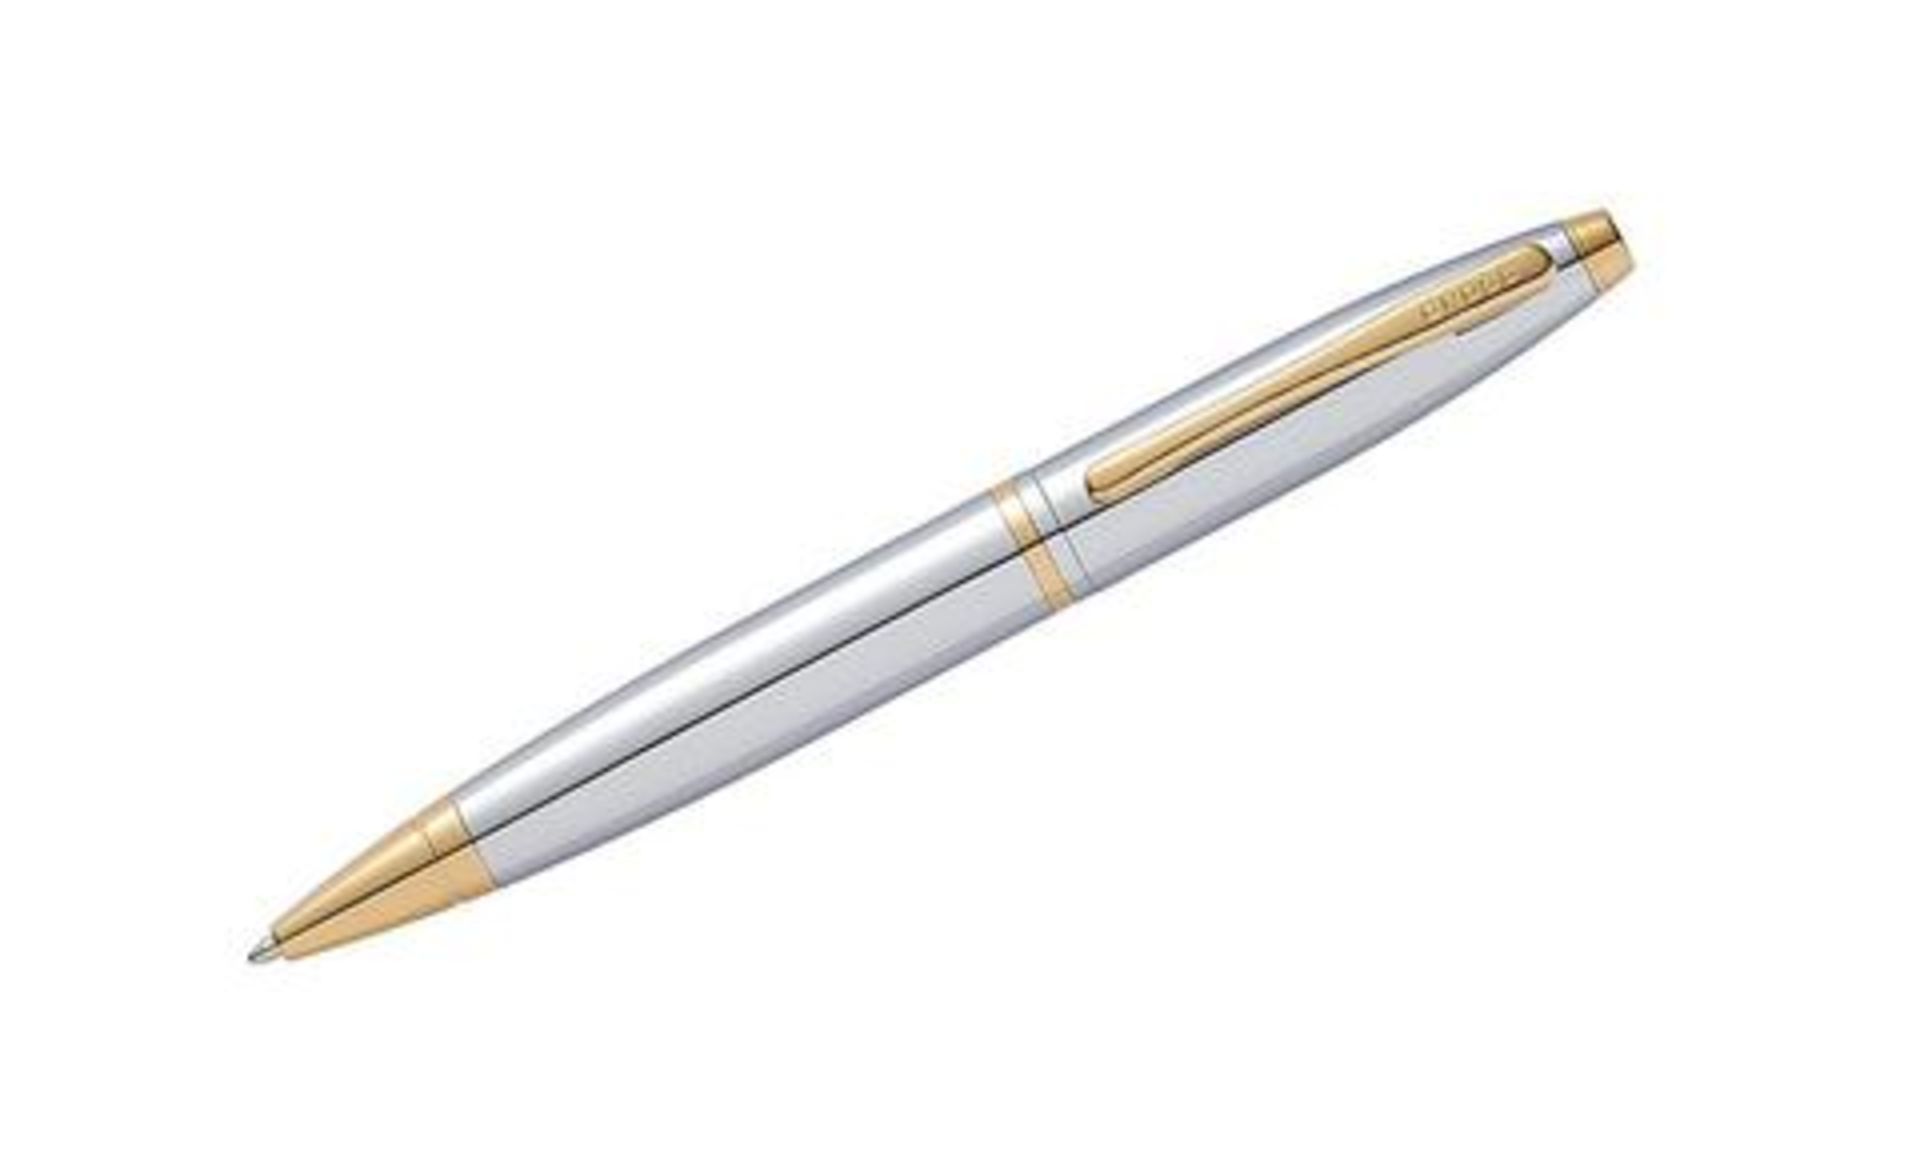 V Brand New Cross Calis Medalist Ball Point Pen - Chrome Finish with 23K Gold Plated Appointments